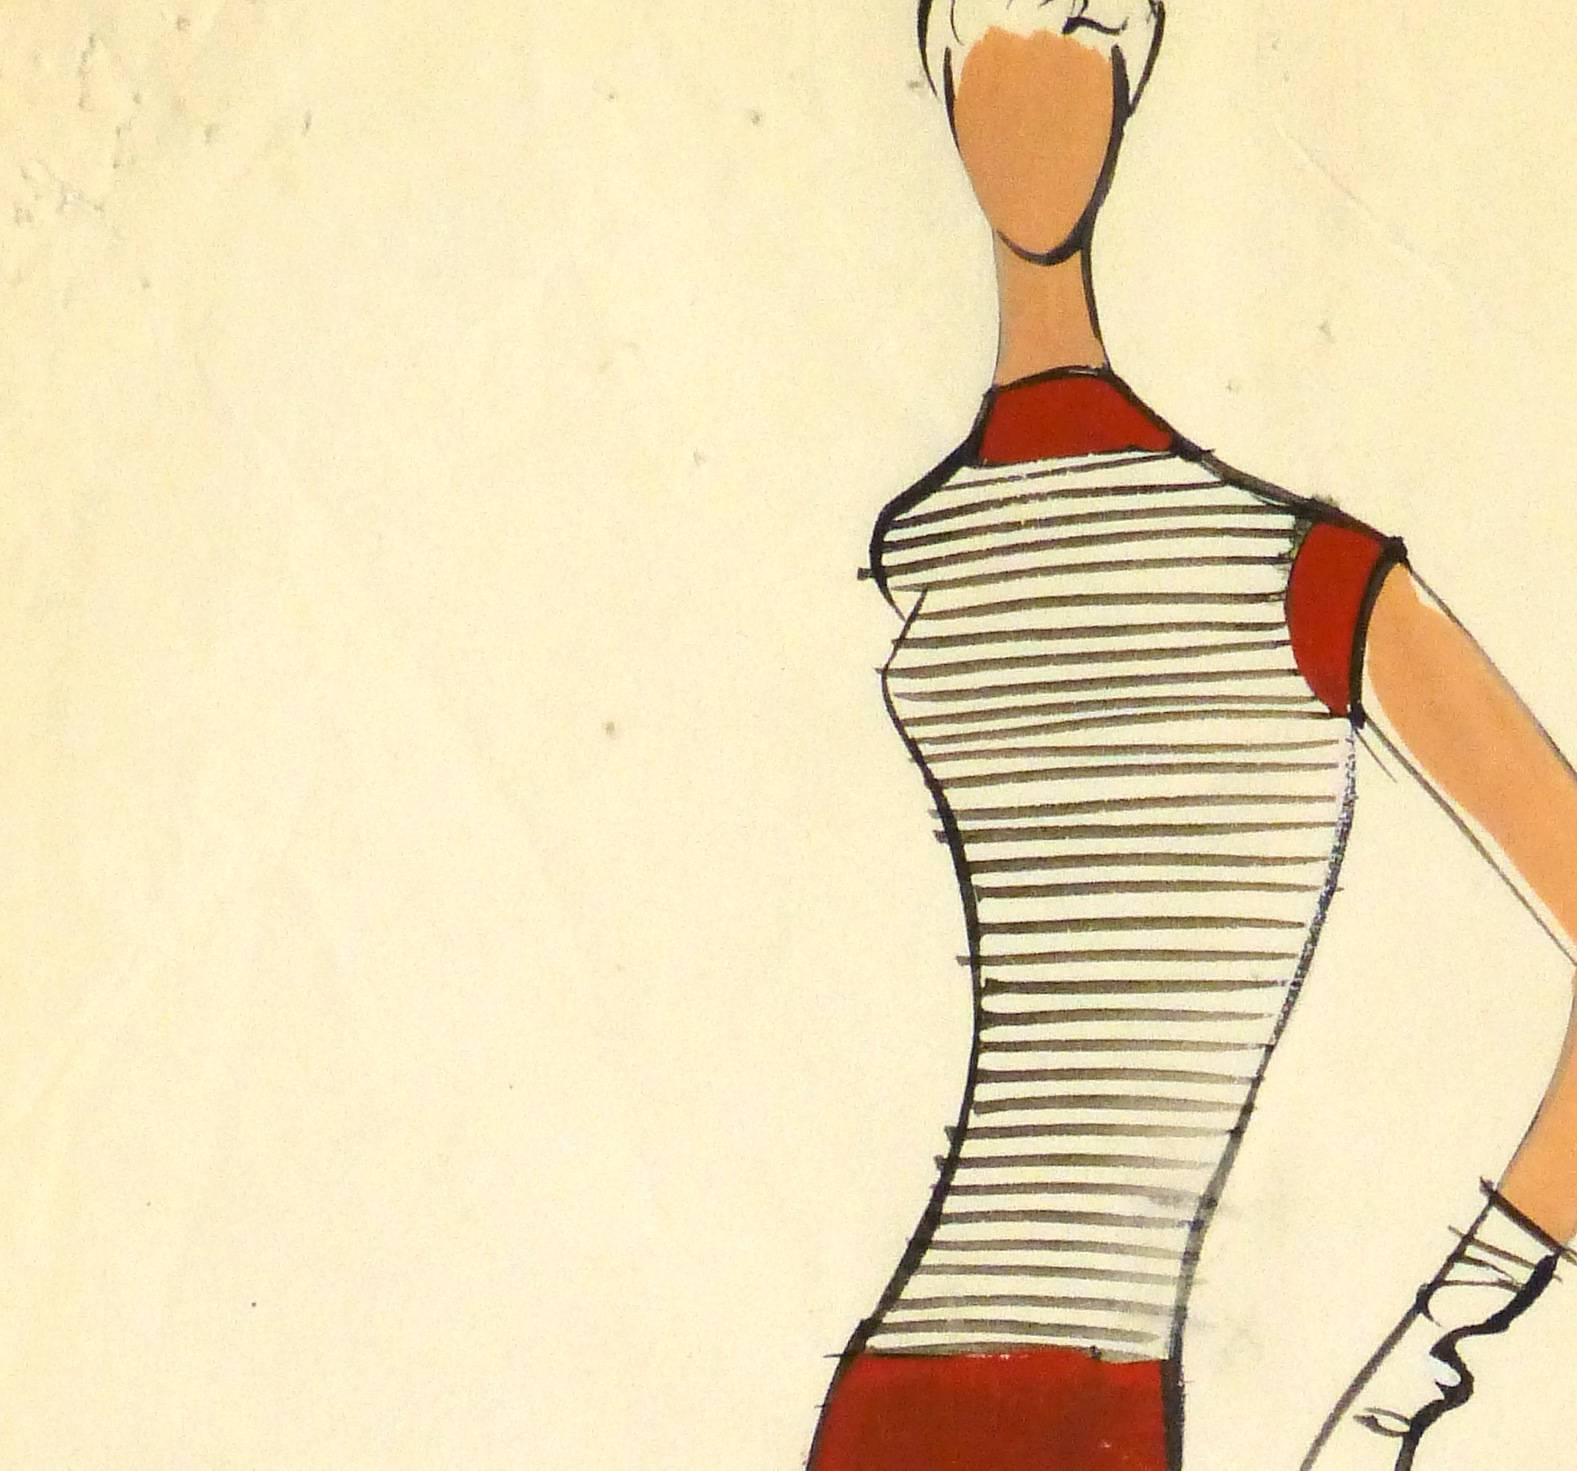 Vintage French acrylic fashion sketch of a slim fitting casual outfit in a rust orange by the famed Balmain Fashion House, circa 1950.

Original one-of-a-kind artwork on paper displayed on a white mat with a gold border. Mat fits a standard-size